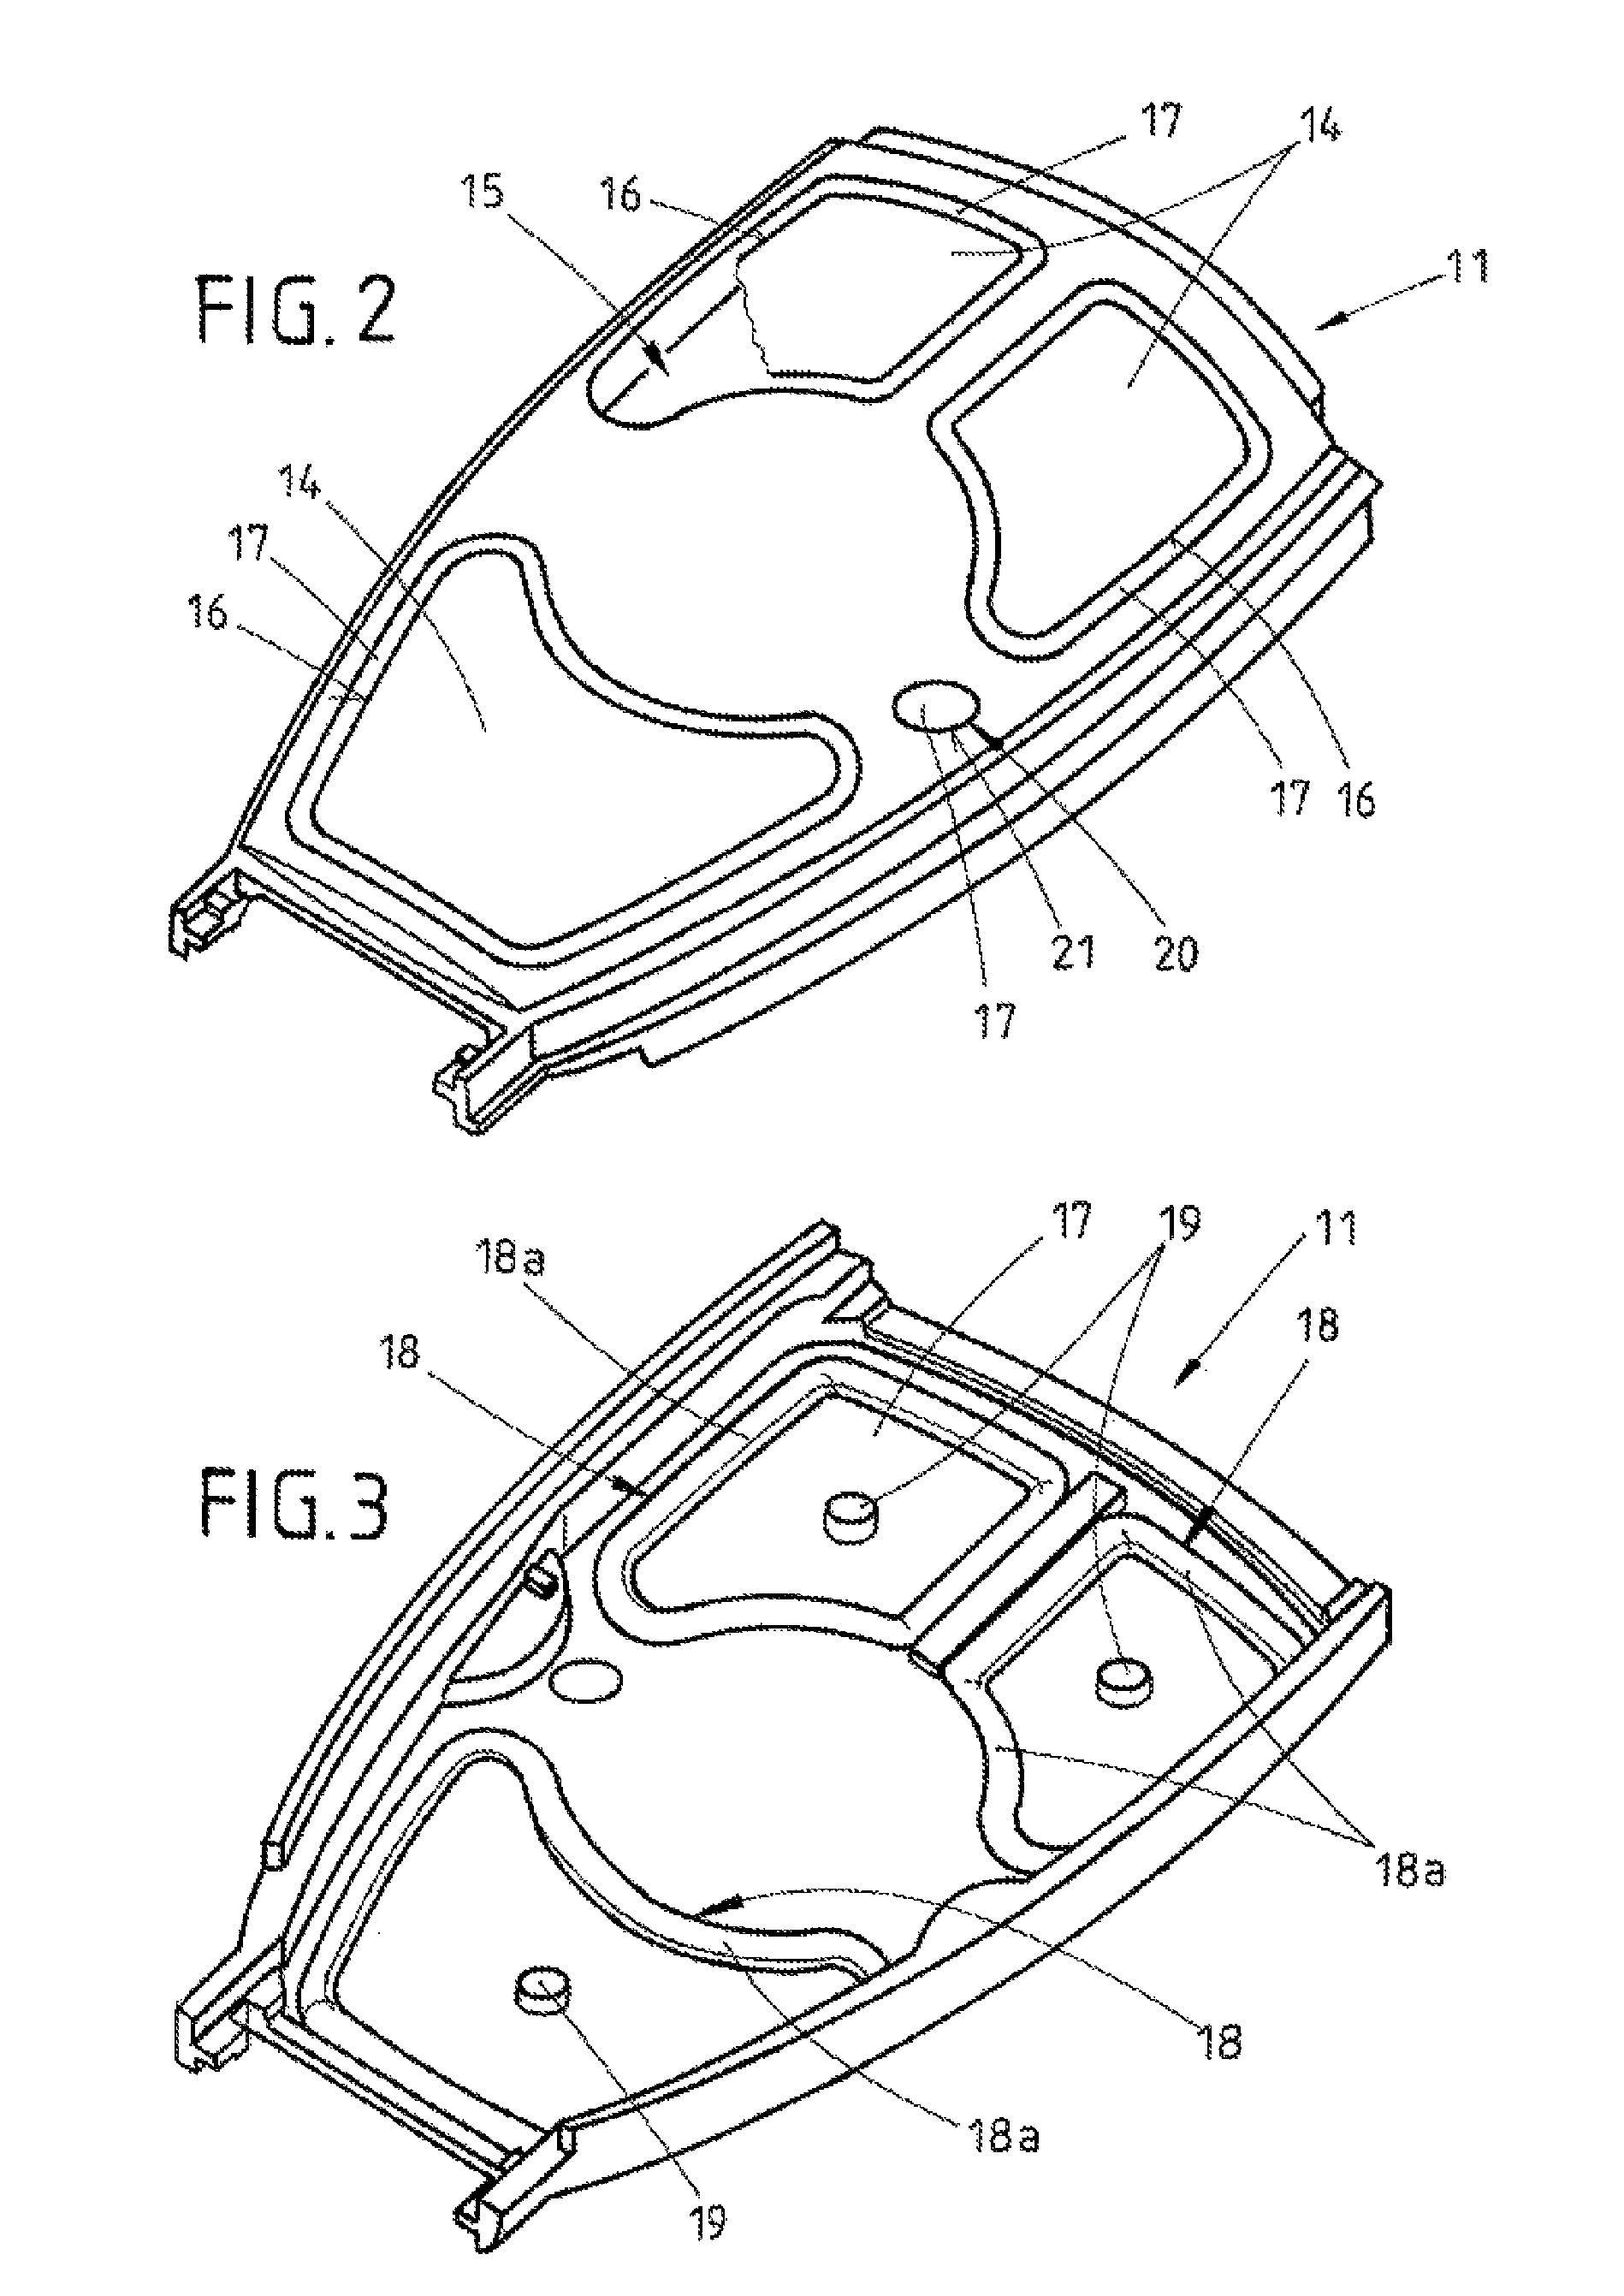 Mobile actuating device